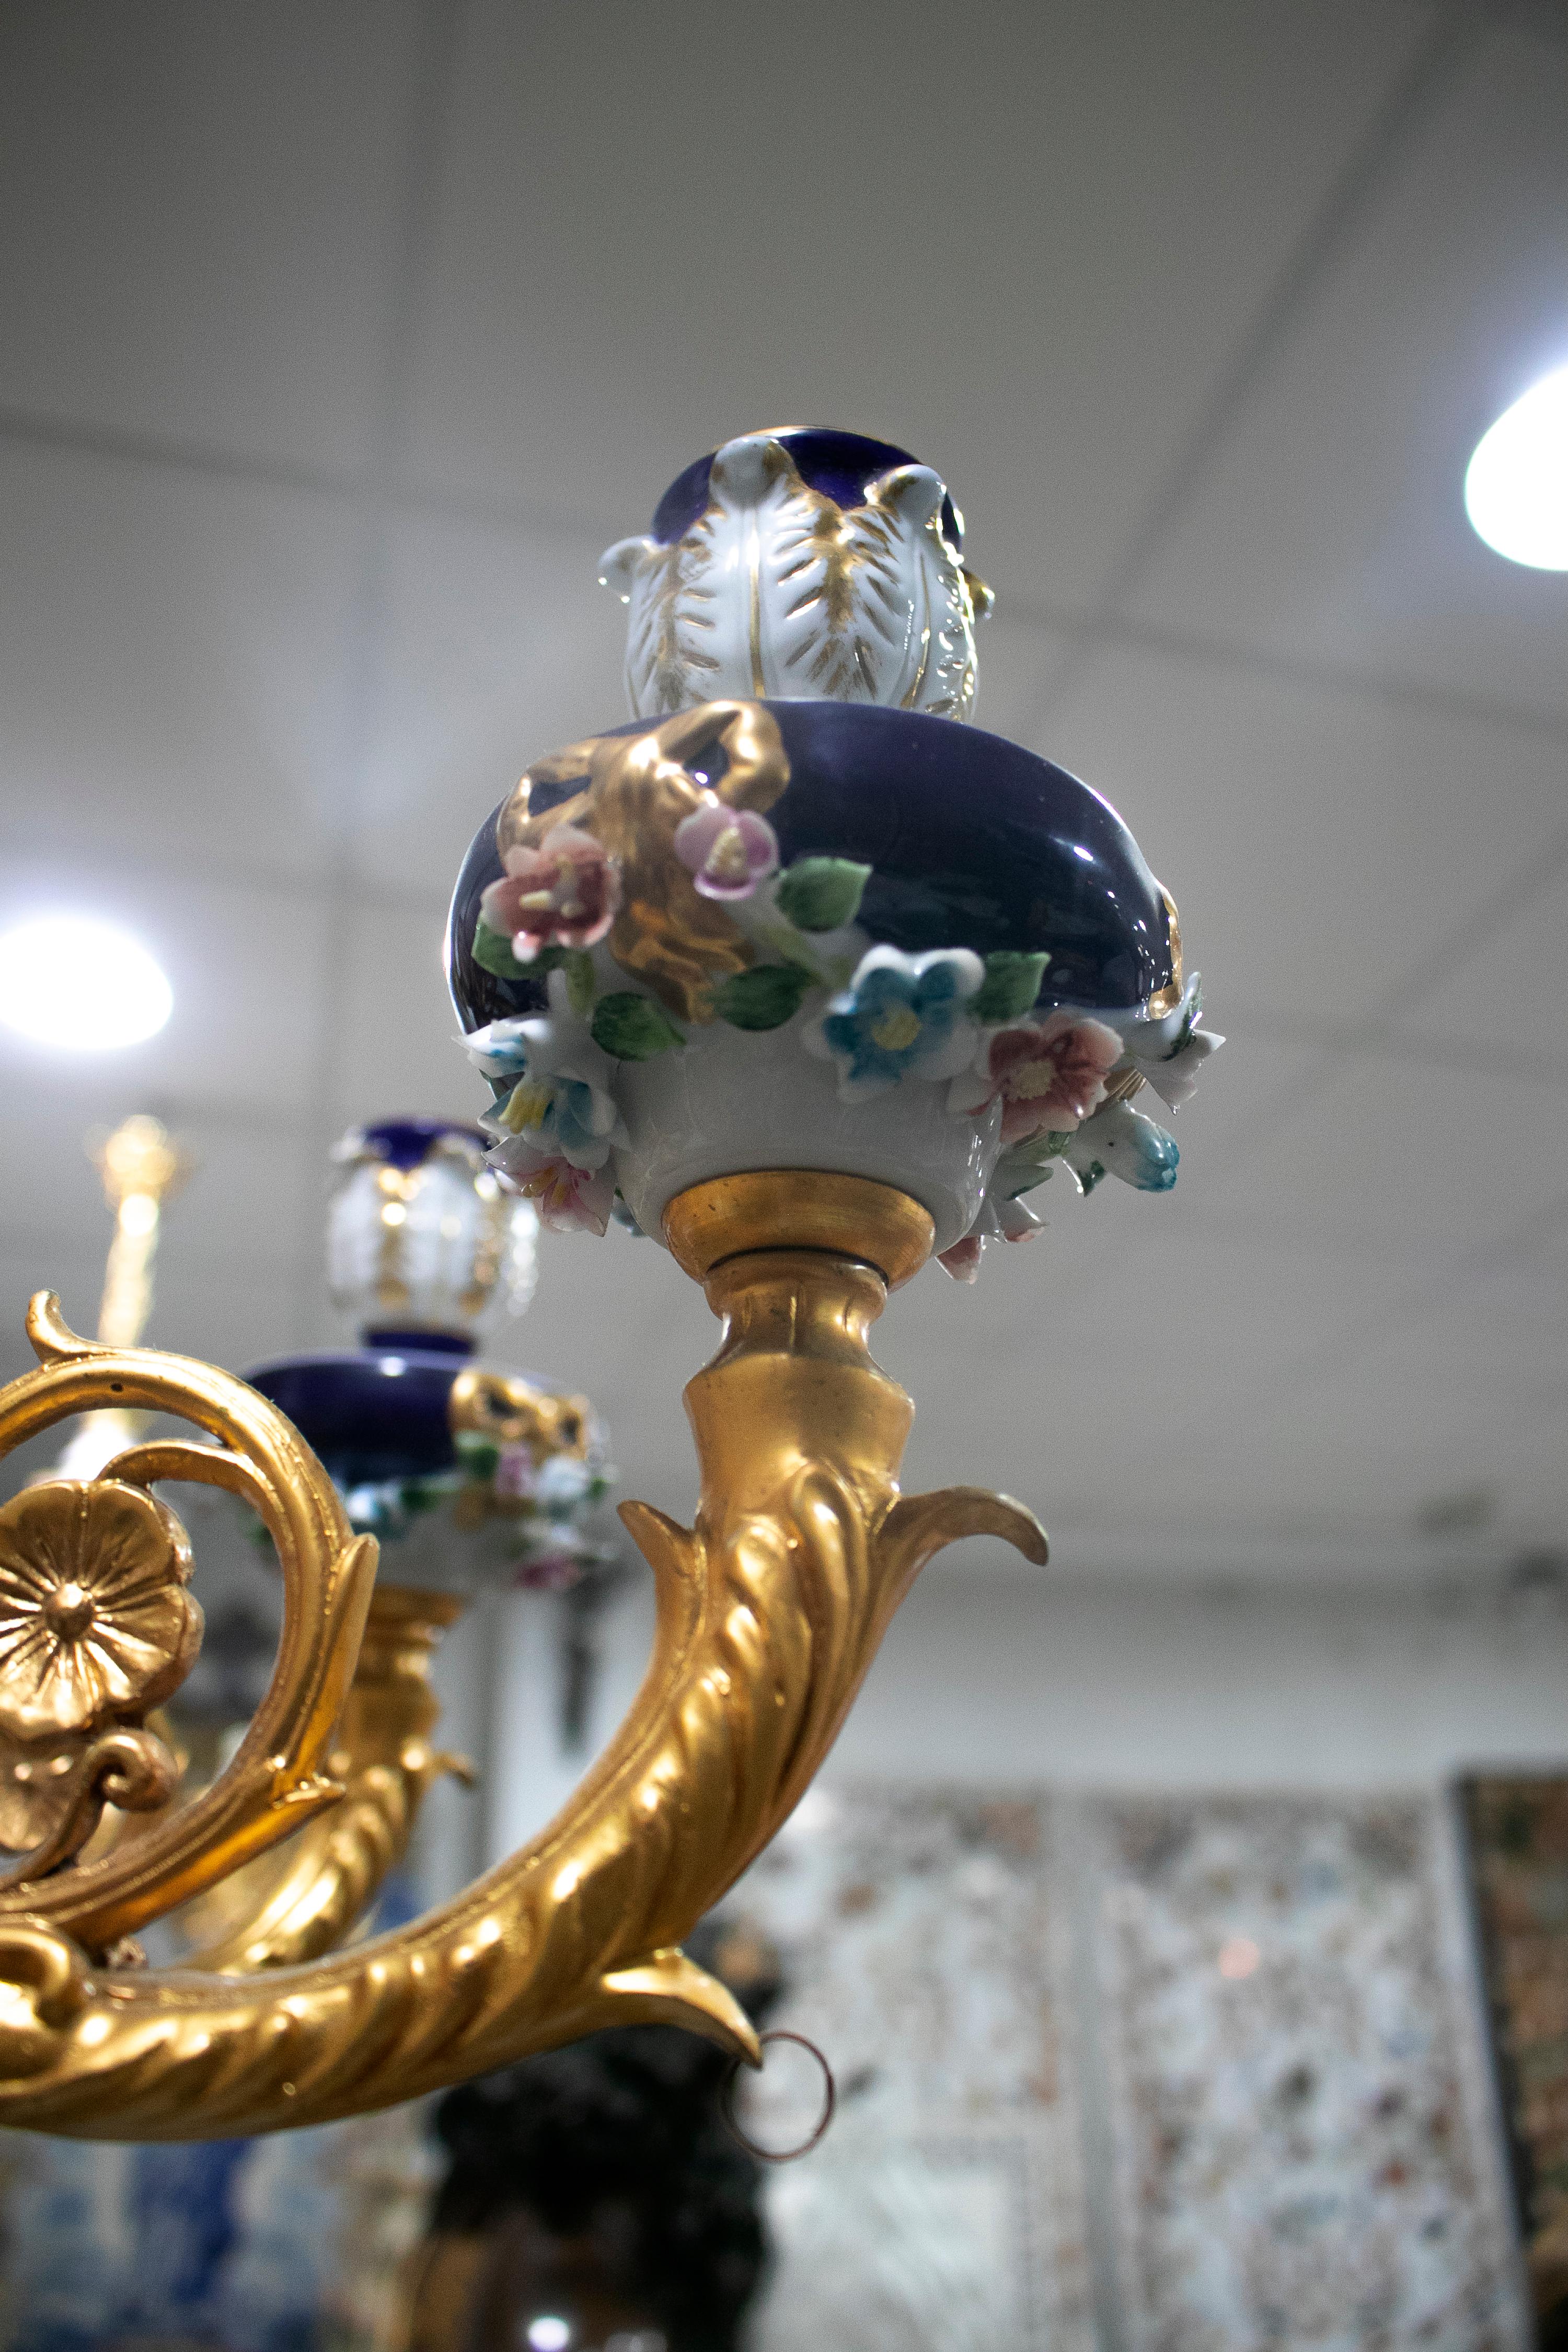 Ornate 1990s French white and cobalt blue hand painted porcelain chandelier with 8 golden bronze arms and hanging glass ornaments.
  